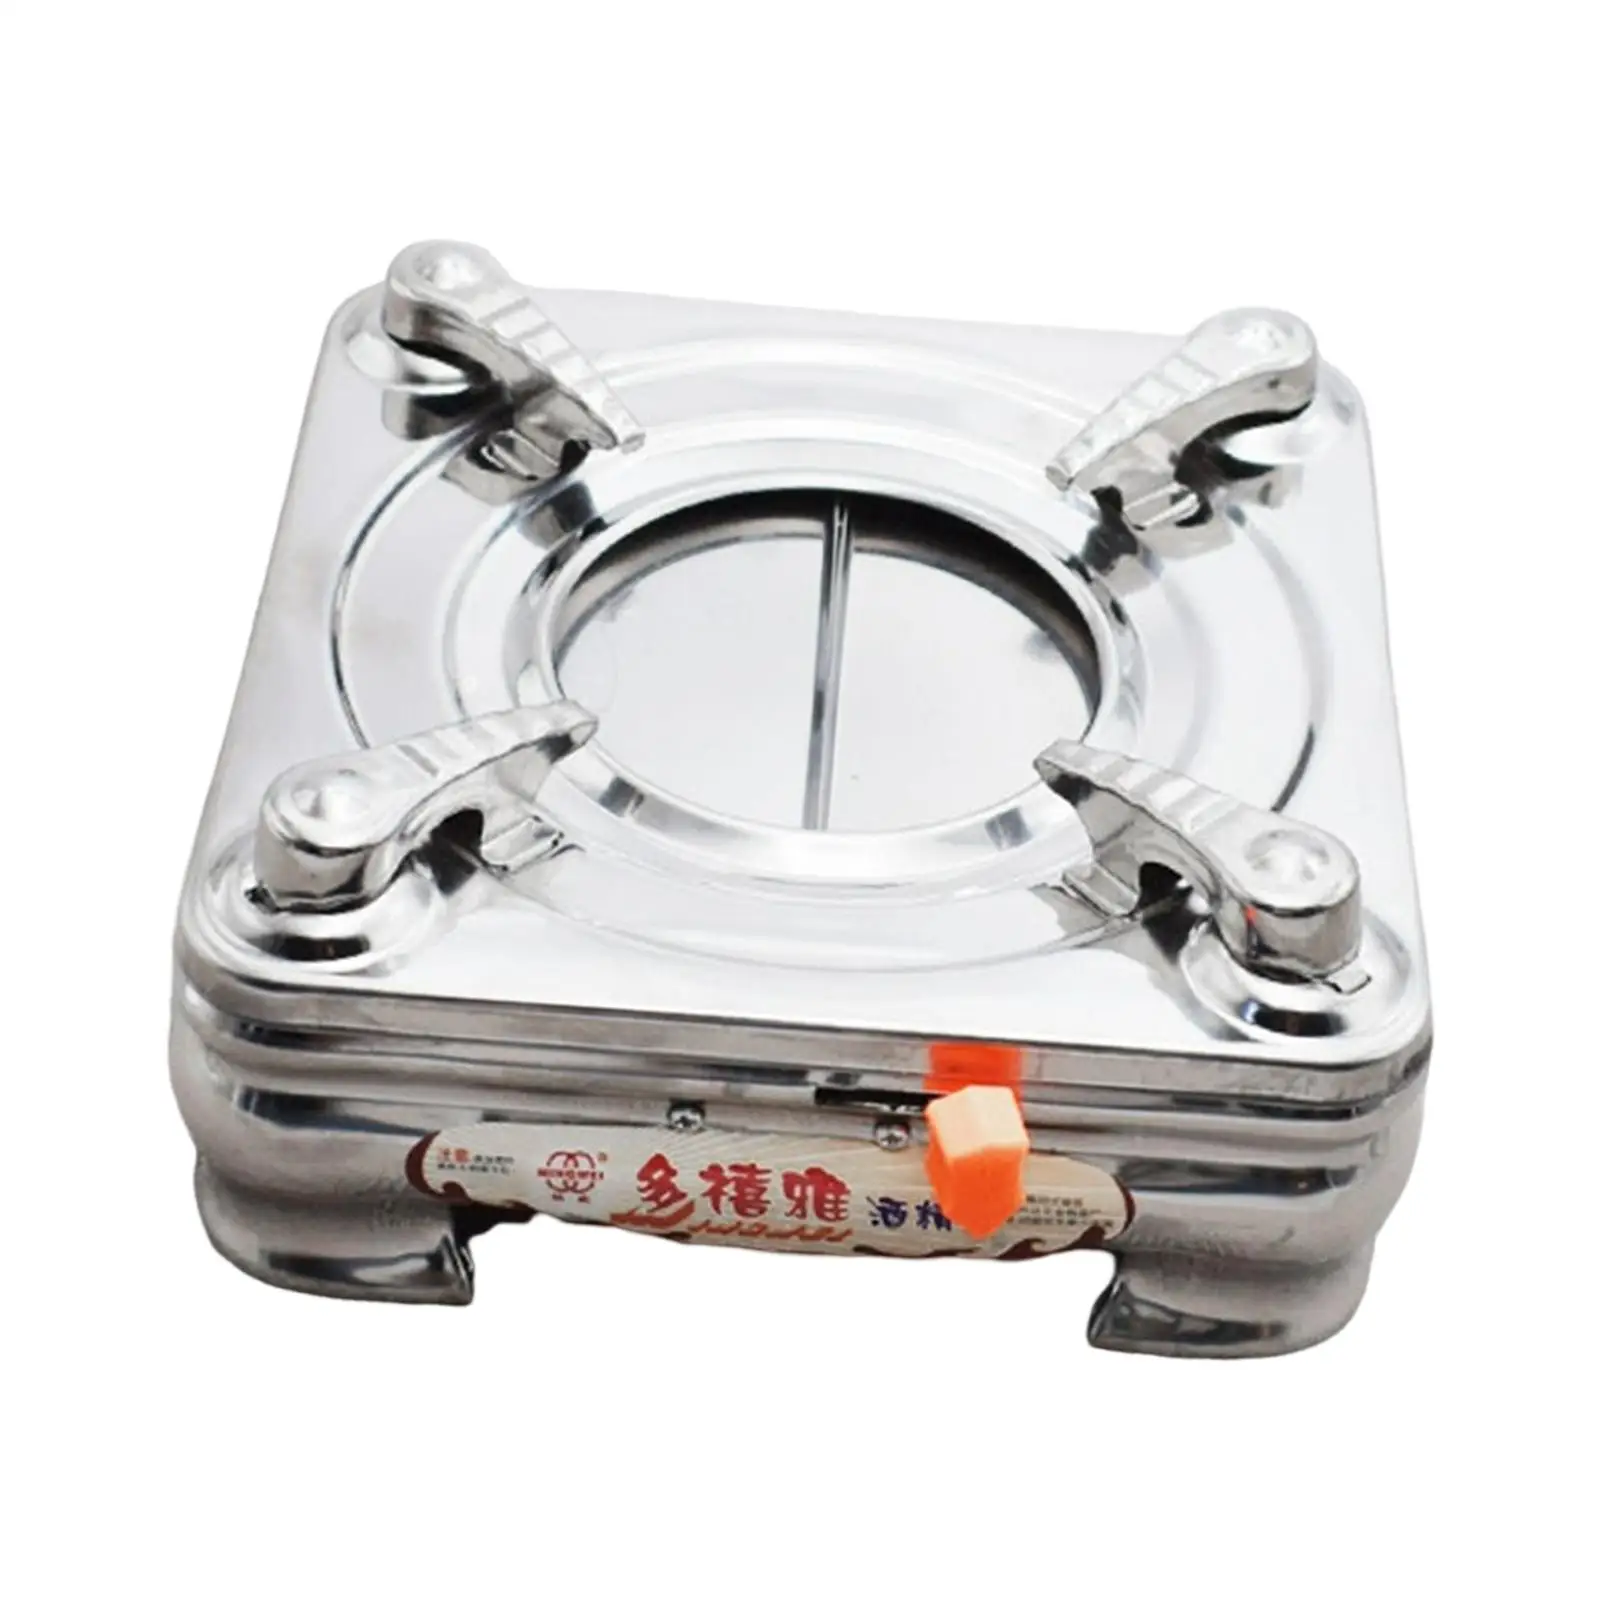 Outdoor Alcohol Stove Camping Stove ,18x18cm for Hiking Fishing Picnic Anti Slip Supporting Feet Accessory Lightweight Cookware